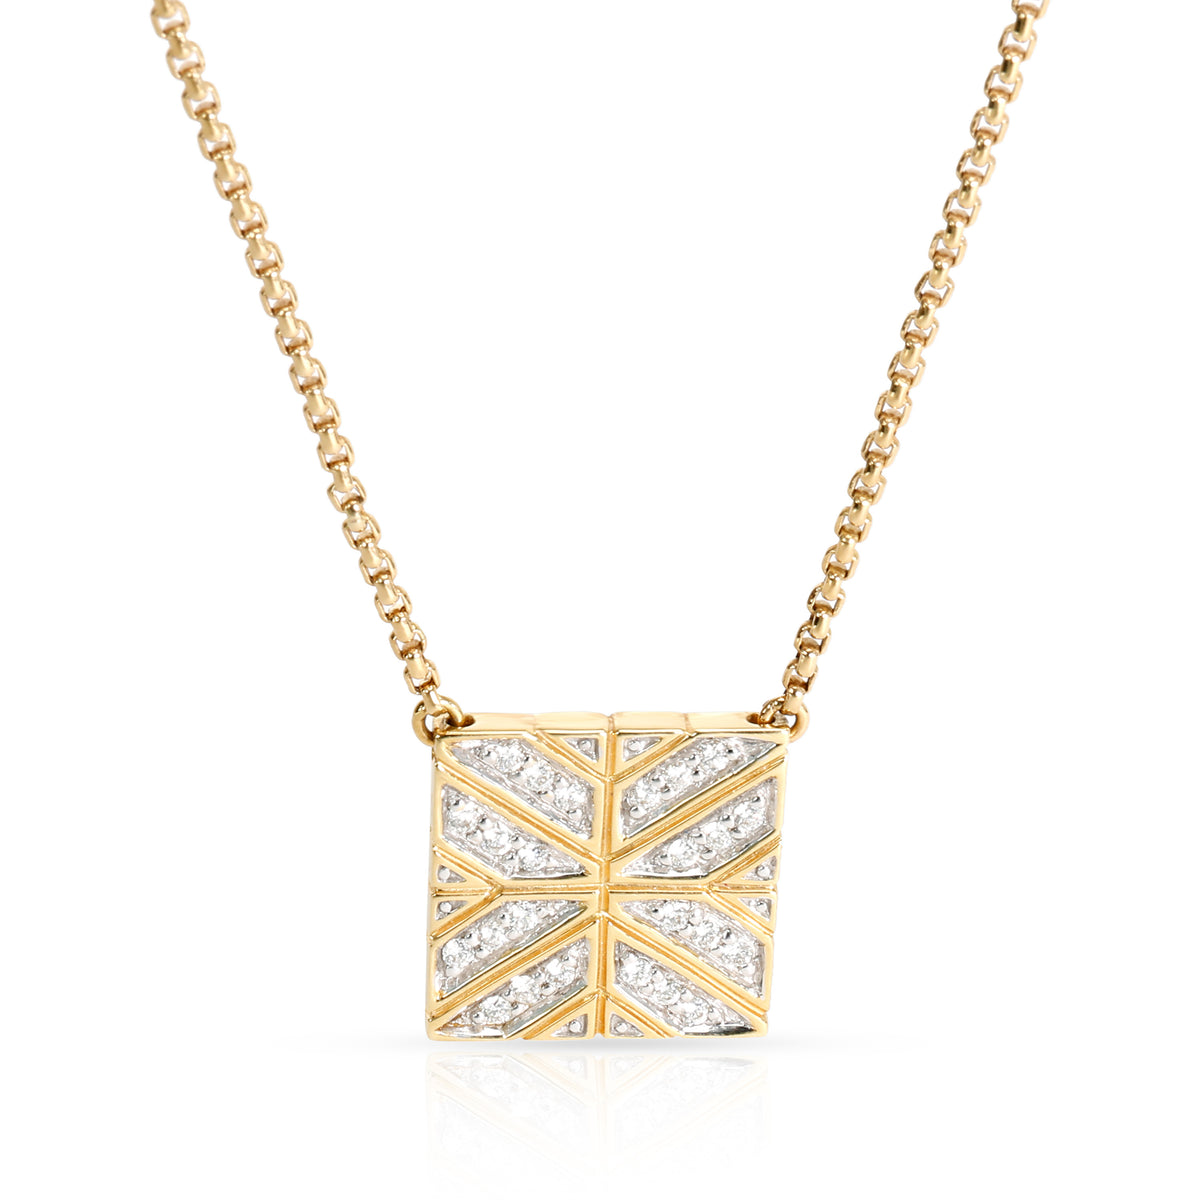 John Hardy Modern Chain Collection Diamond Fashion Necklace in 18K Yellow Gold 0